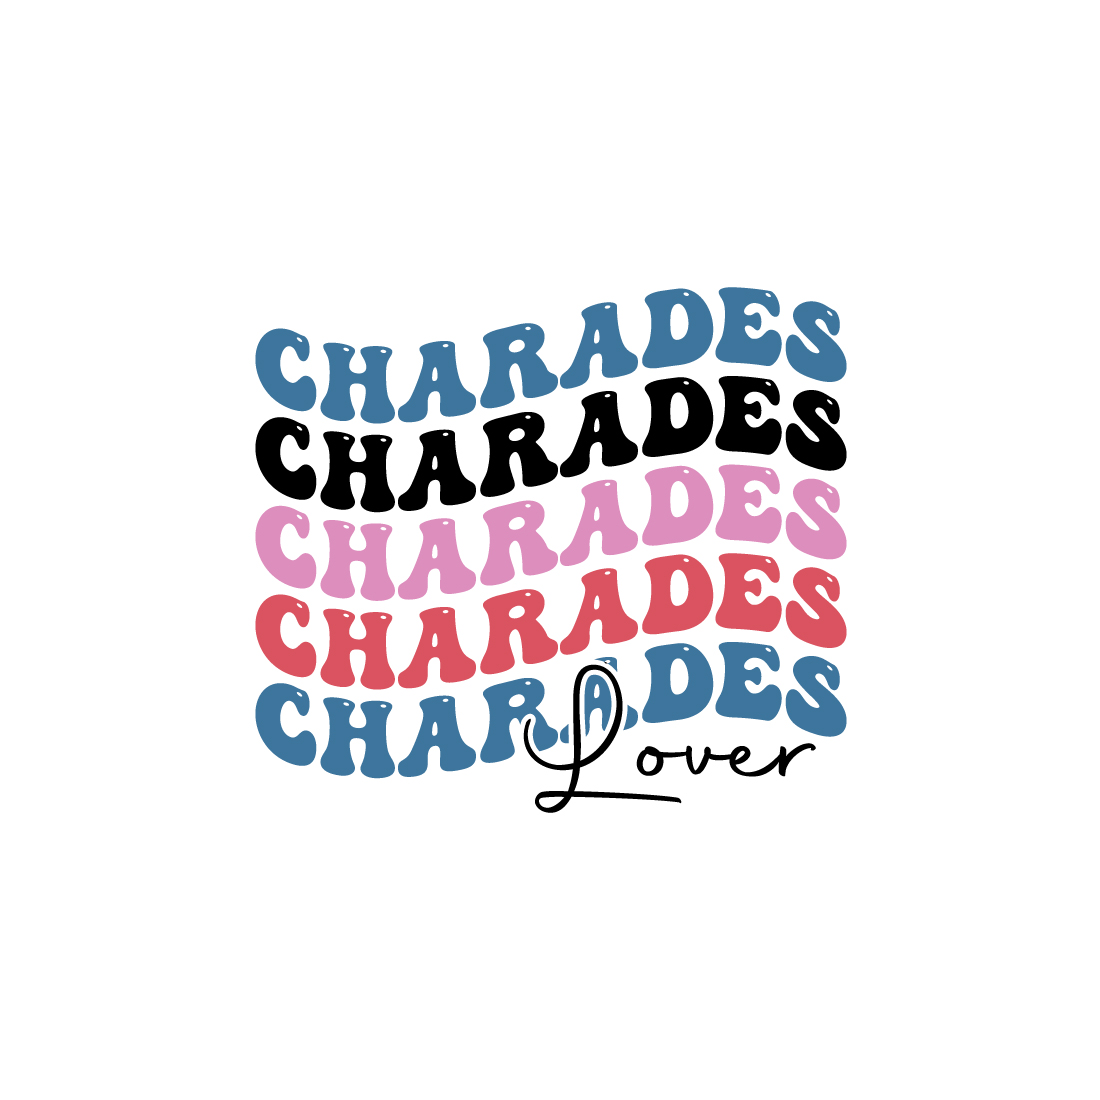 Charades lover indoor game retro typography design for t-shirts, cards, frame artwork, phone cases, bags, mugs, stickers, tumblers, print, etc preview image.